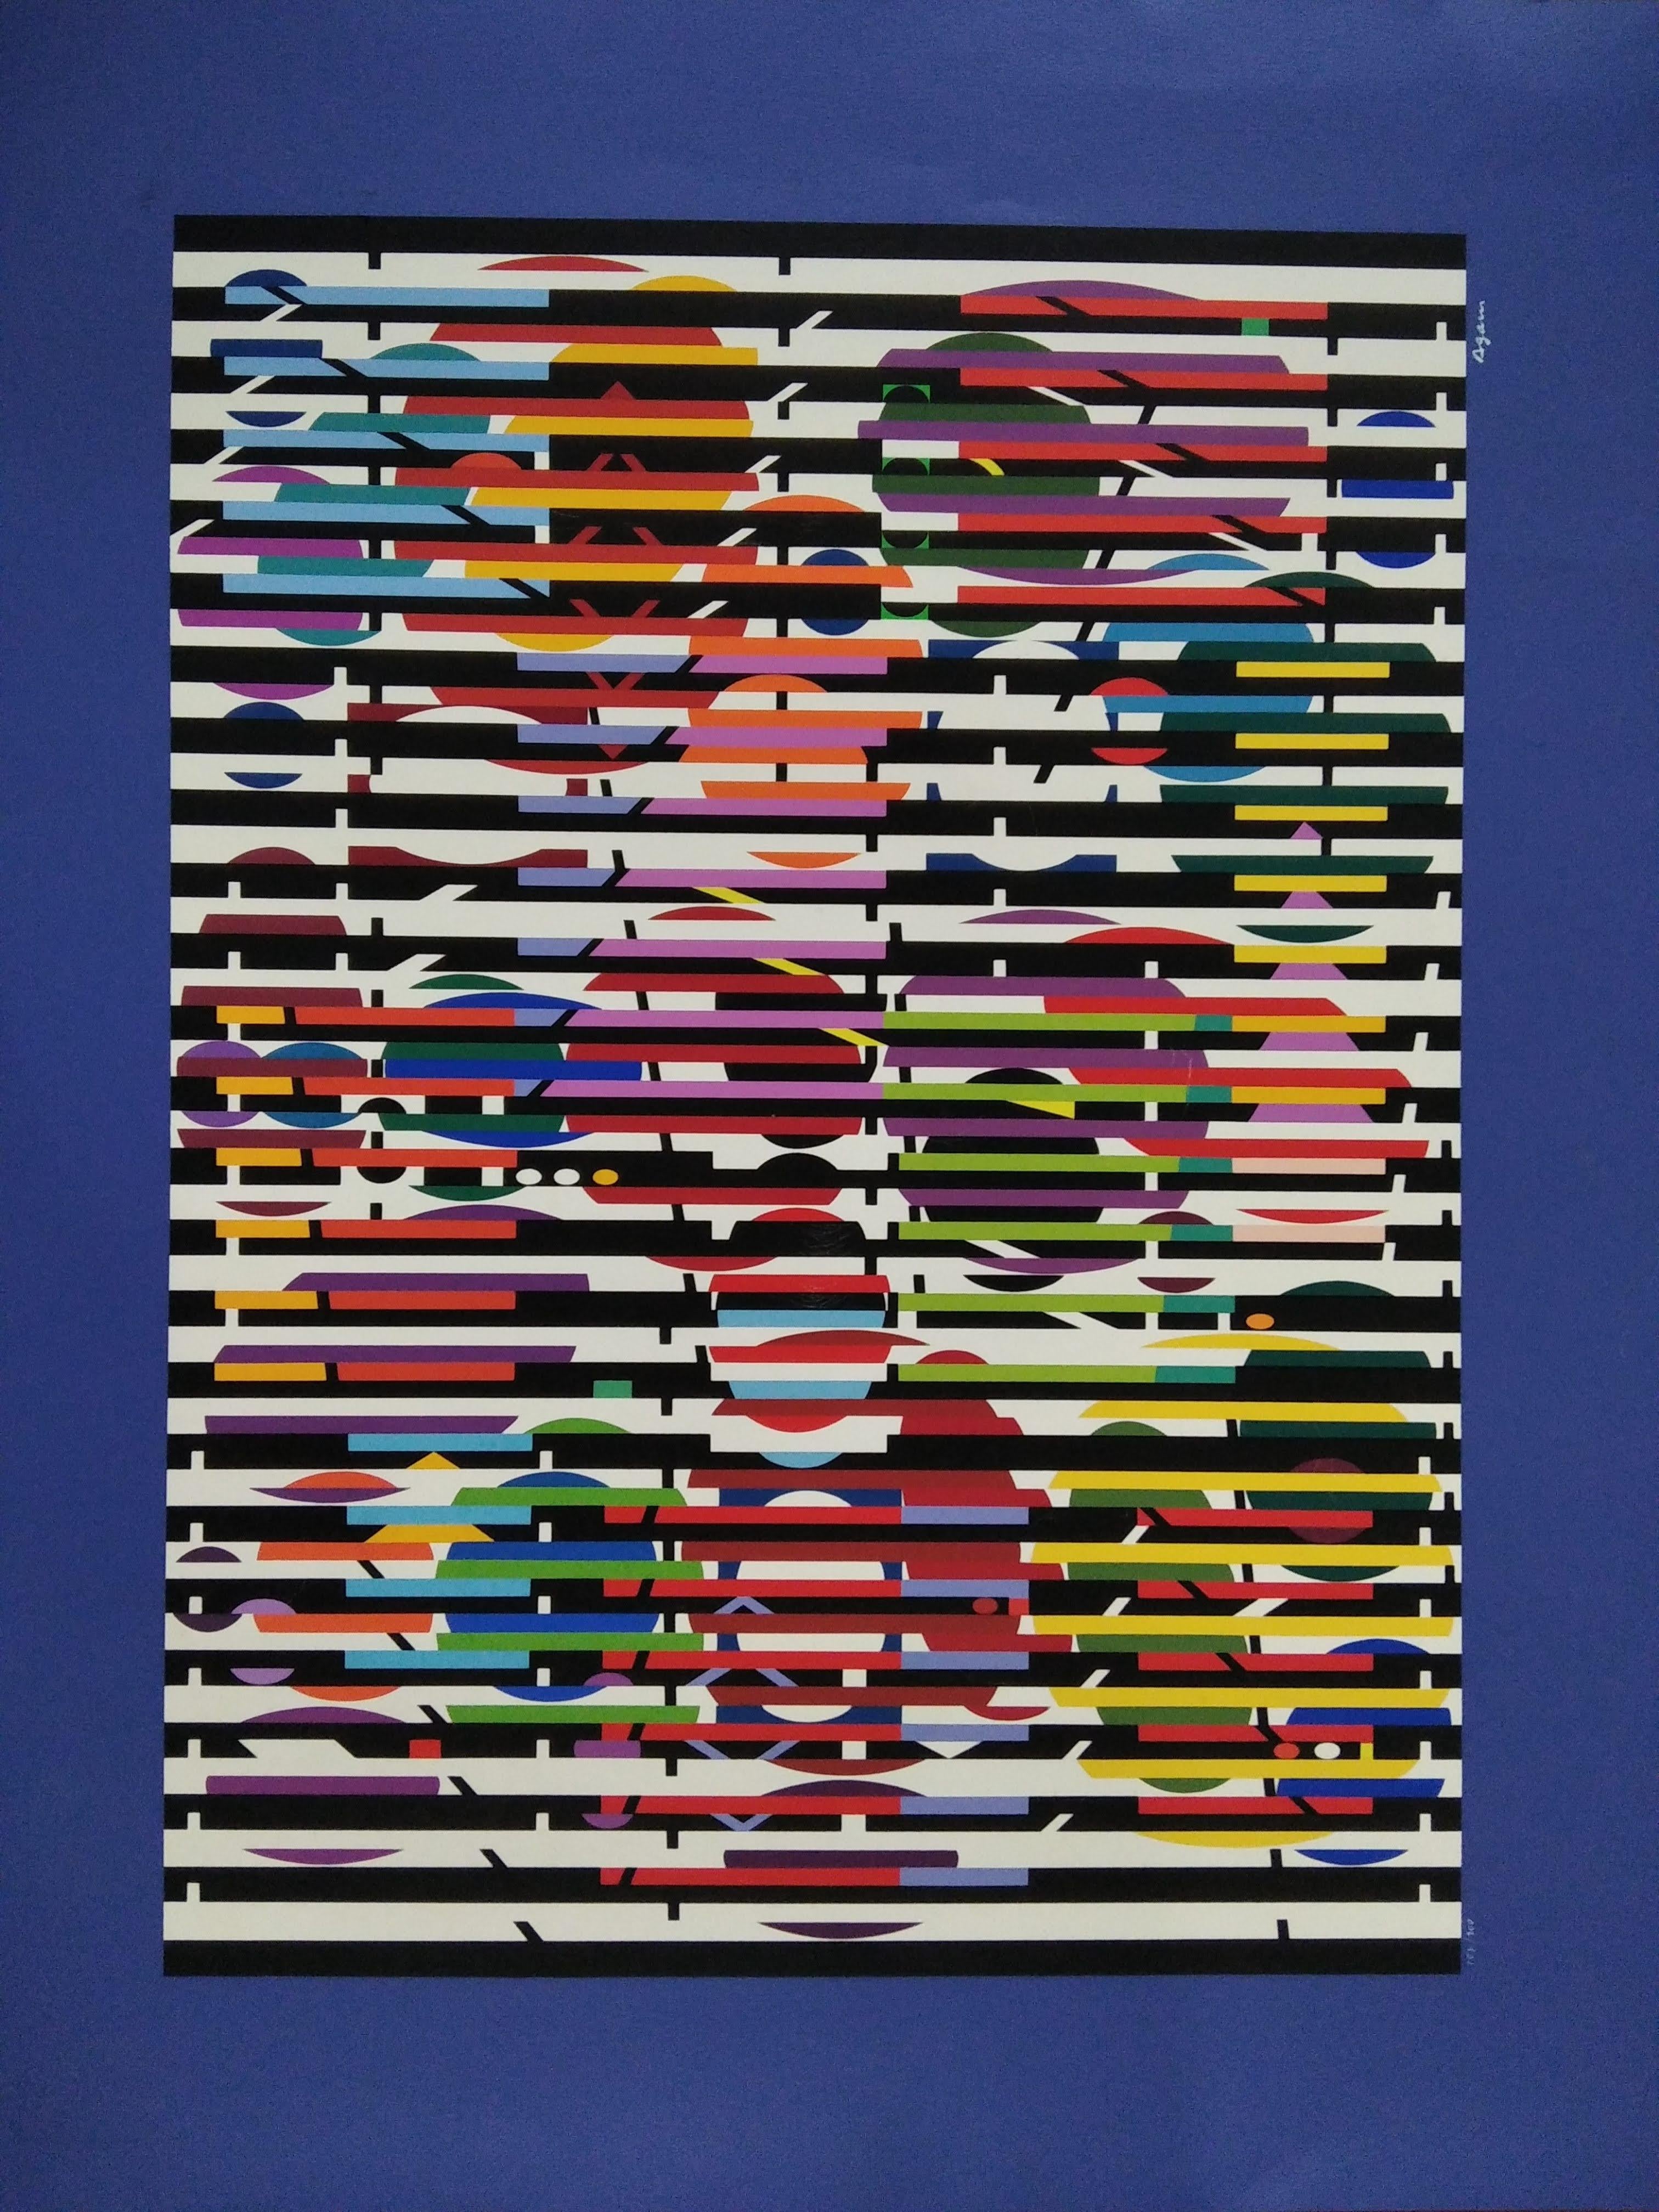 Untitled - Abstract Geometric Print by Yaacov Agam